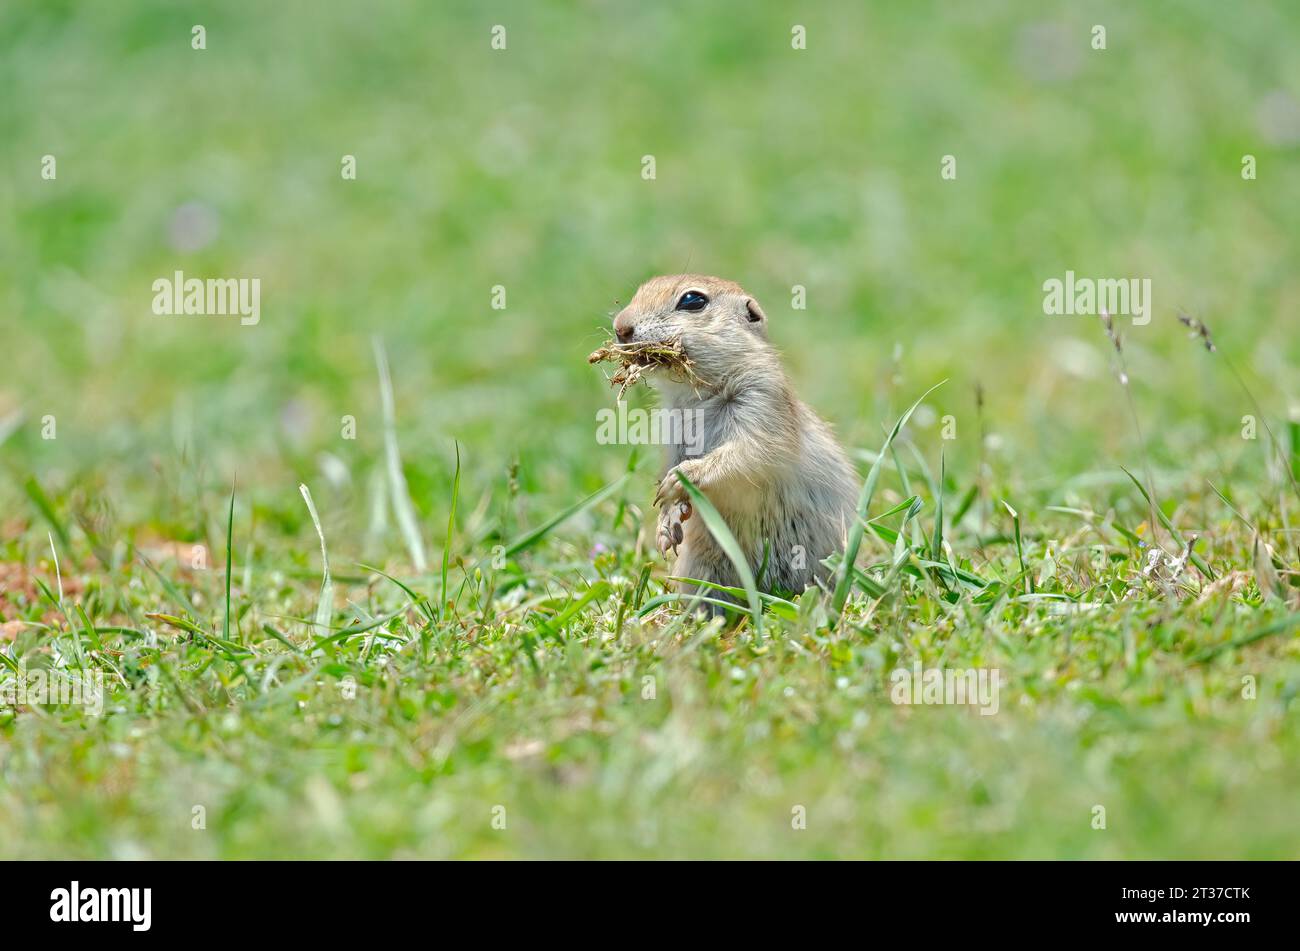 Ground squirrel feeding. Cute funny animal ground squirrel. Green nature background. Stock Photo